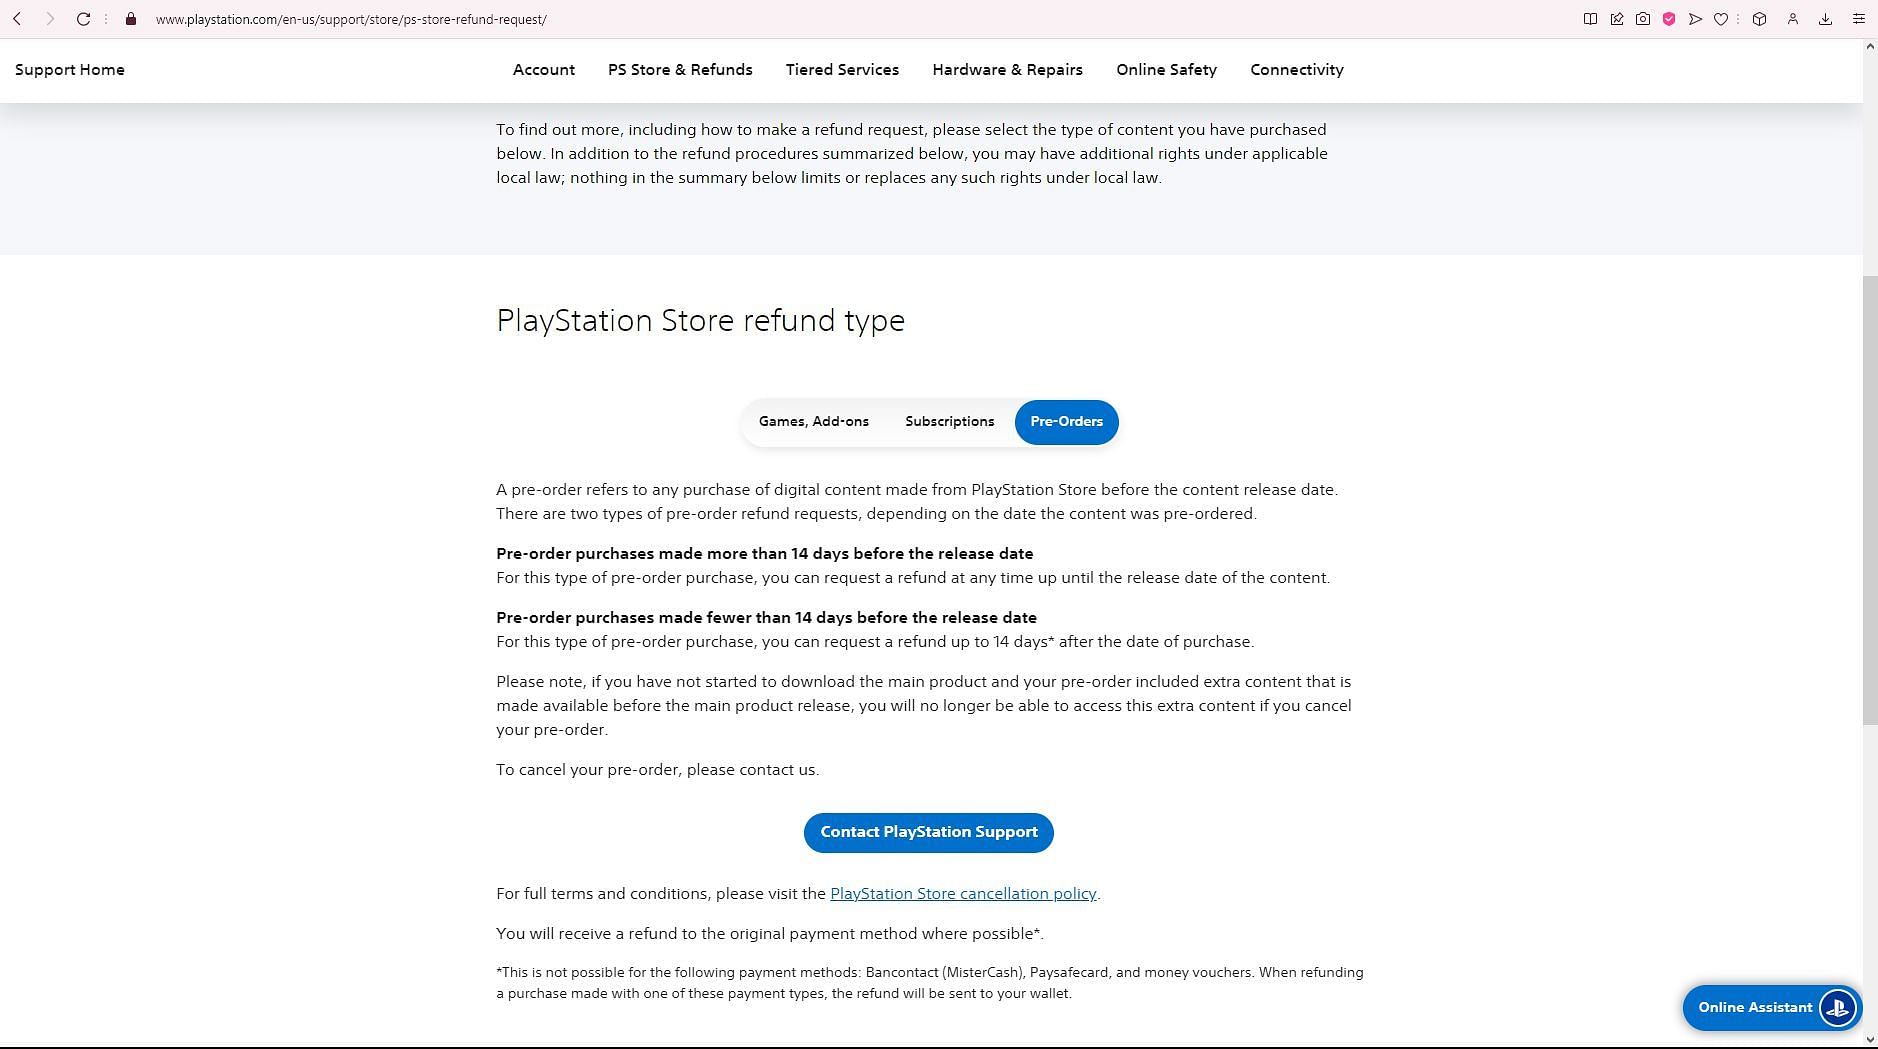 udvande siv Kvæle How to refund a game on PS5?